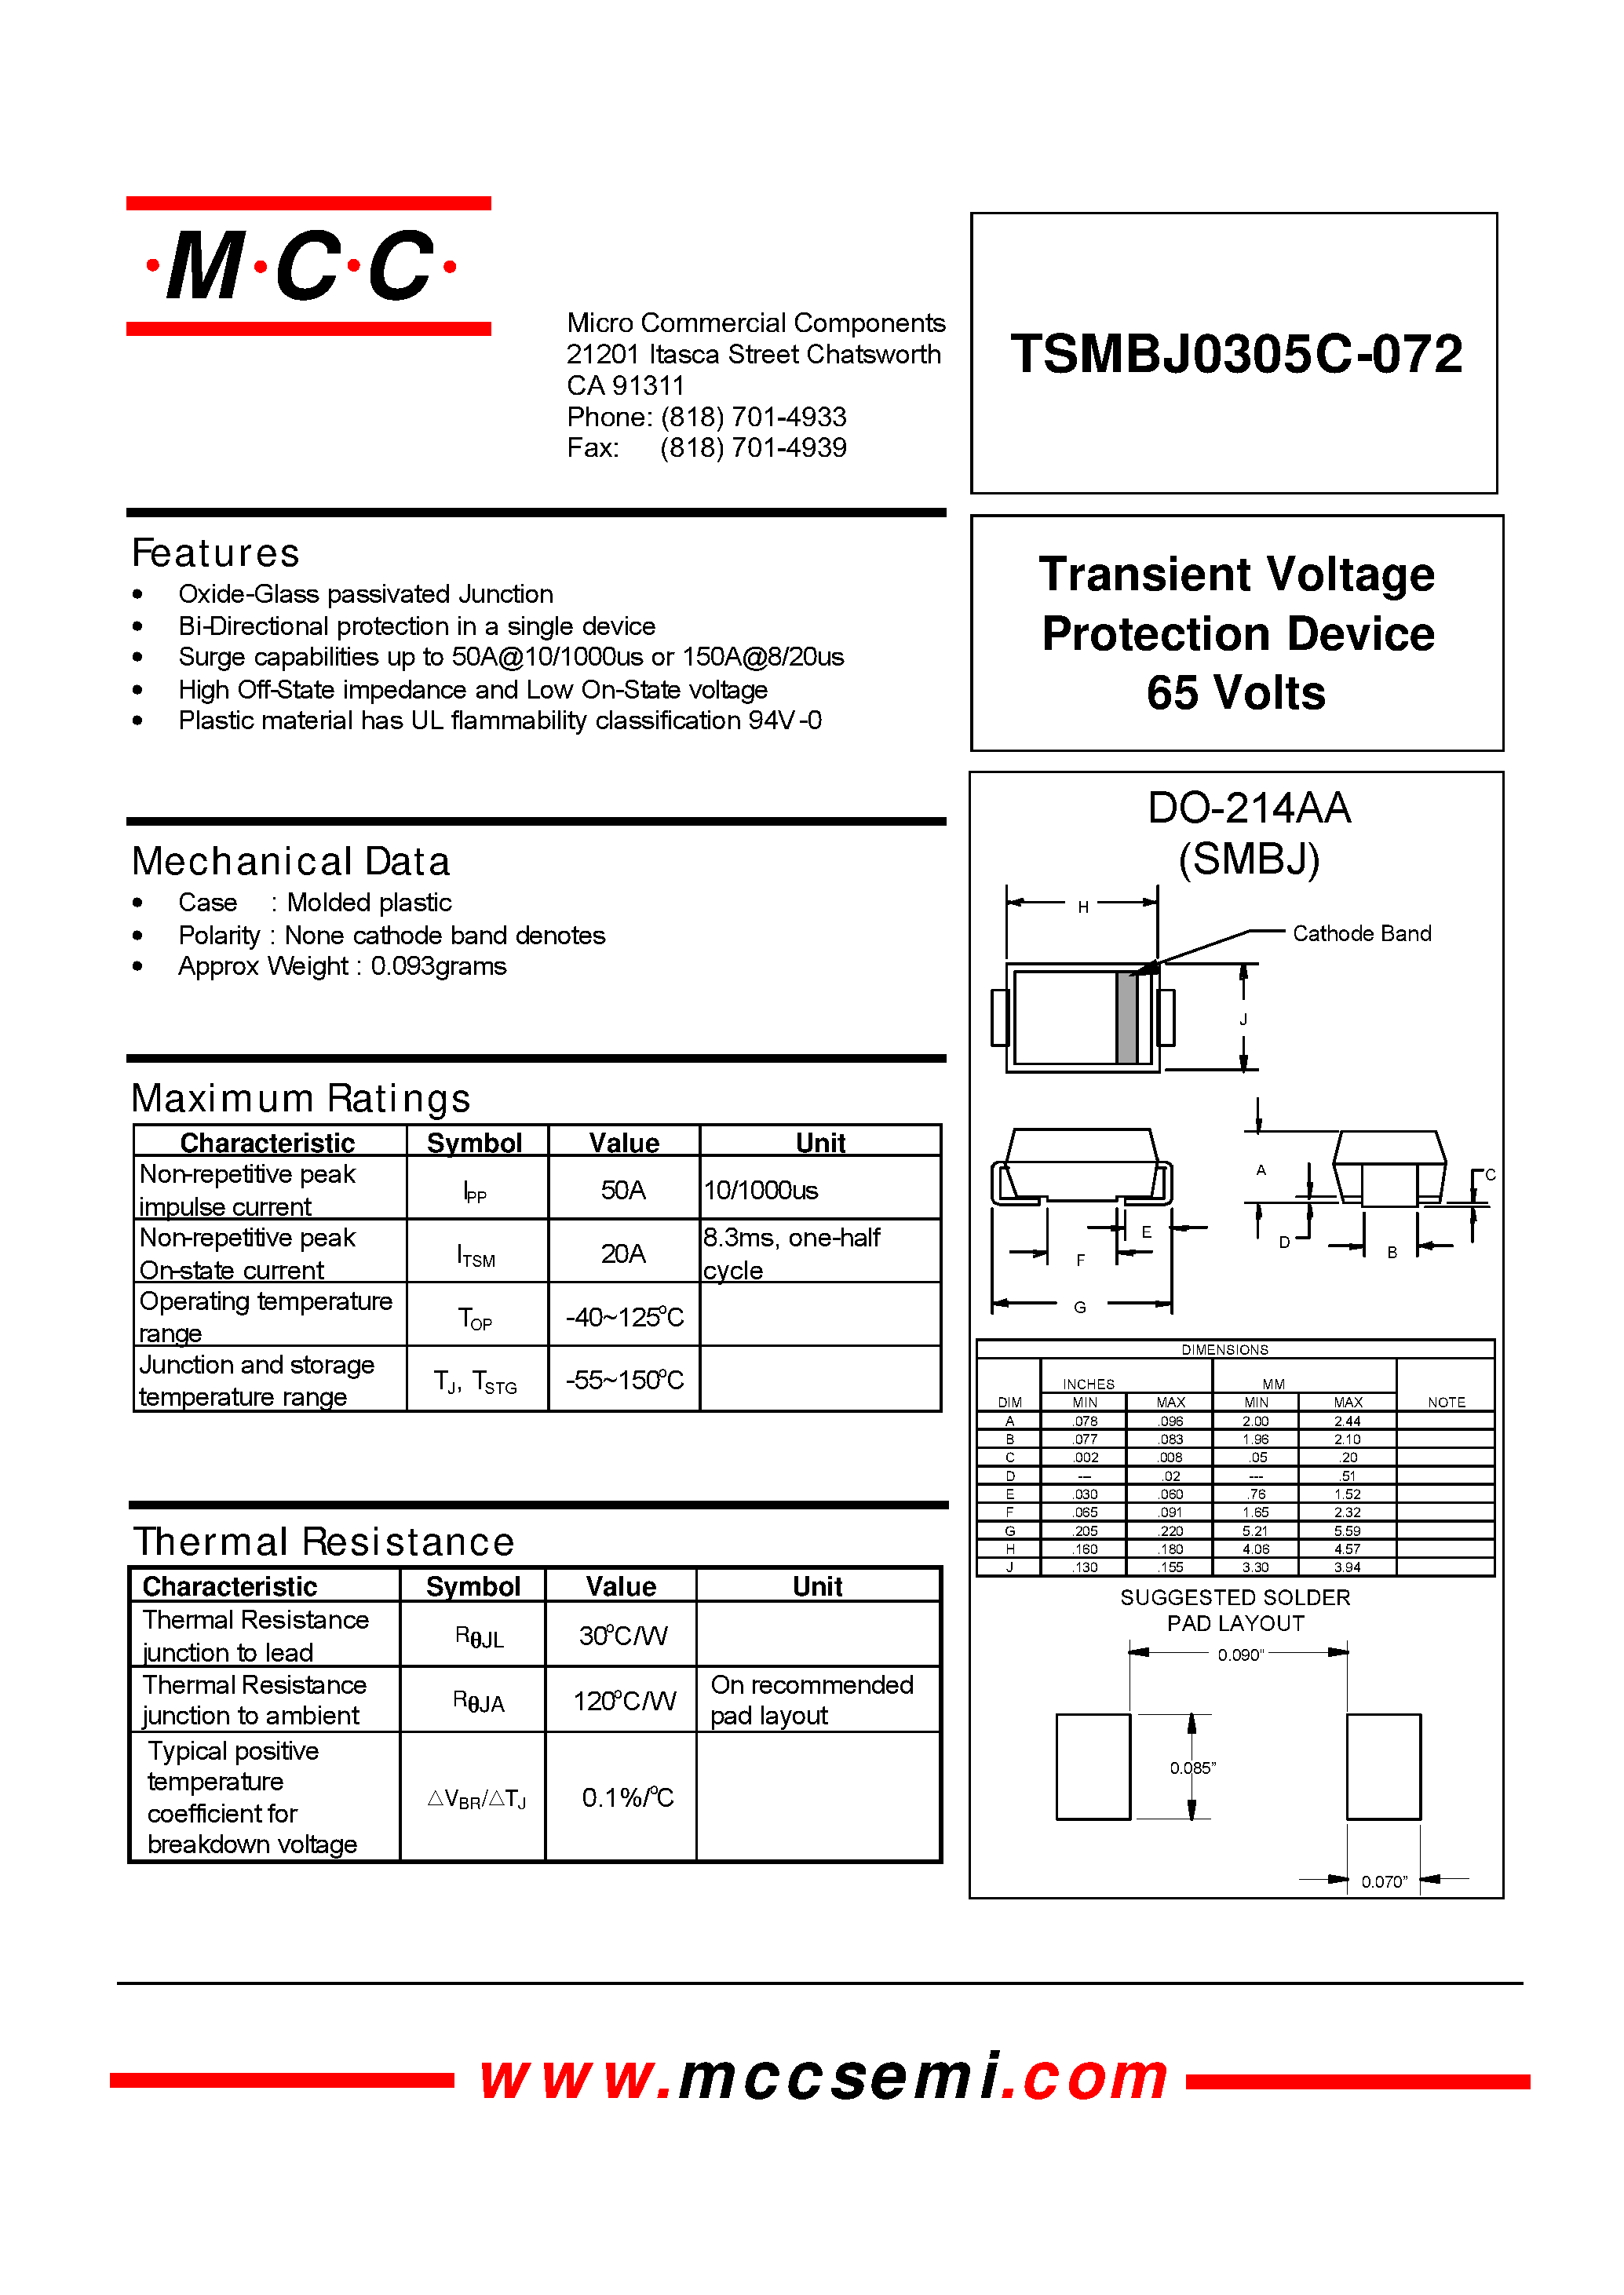 Datasheet TSMBJ0305C-072 - Transient Voltage Protection Device 65 Volts page 1